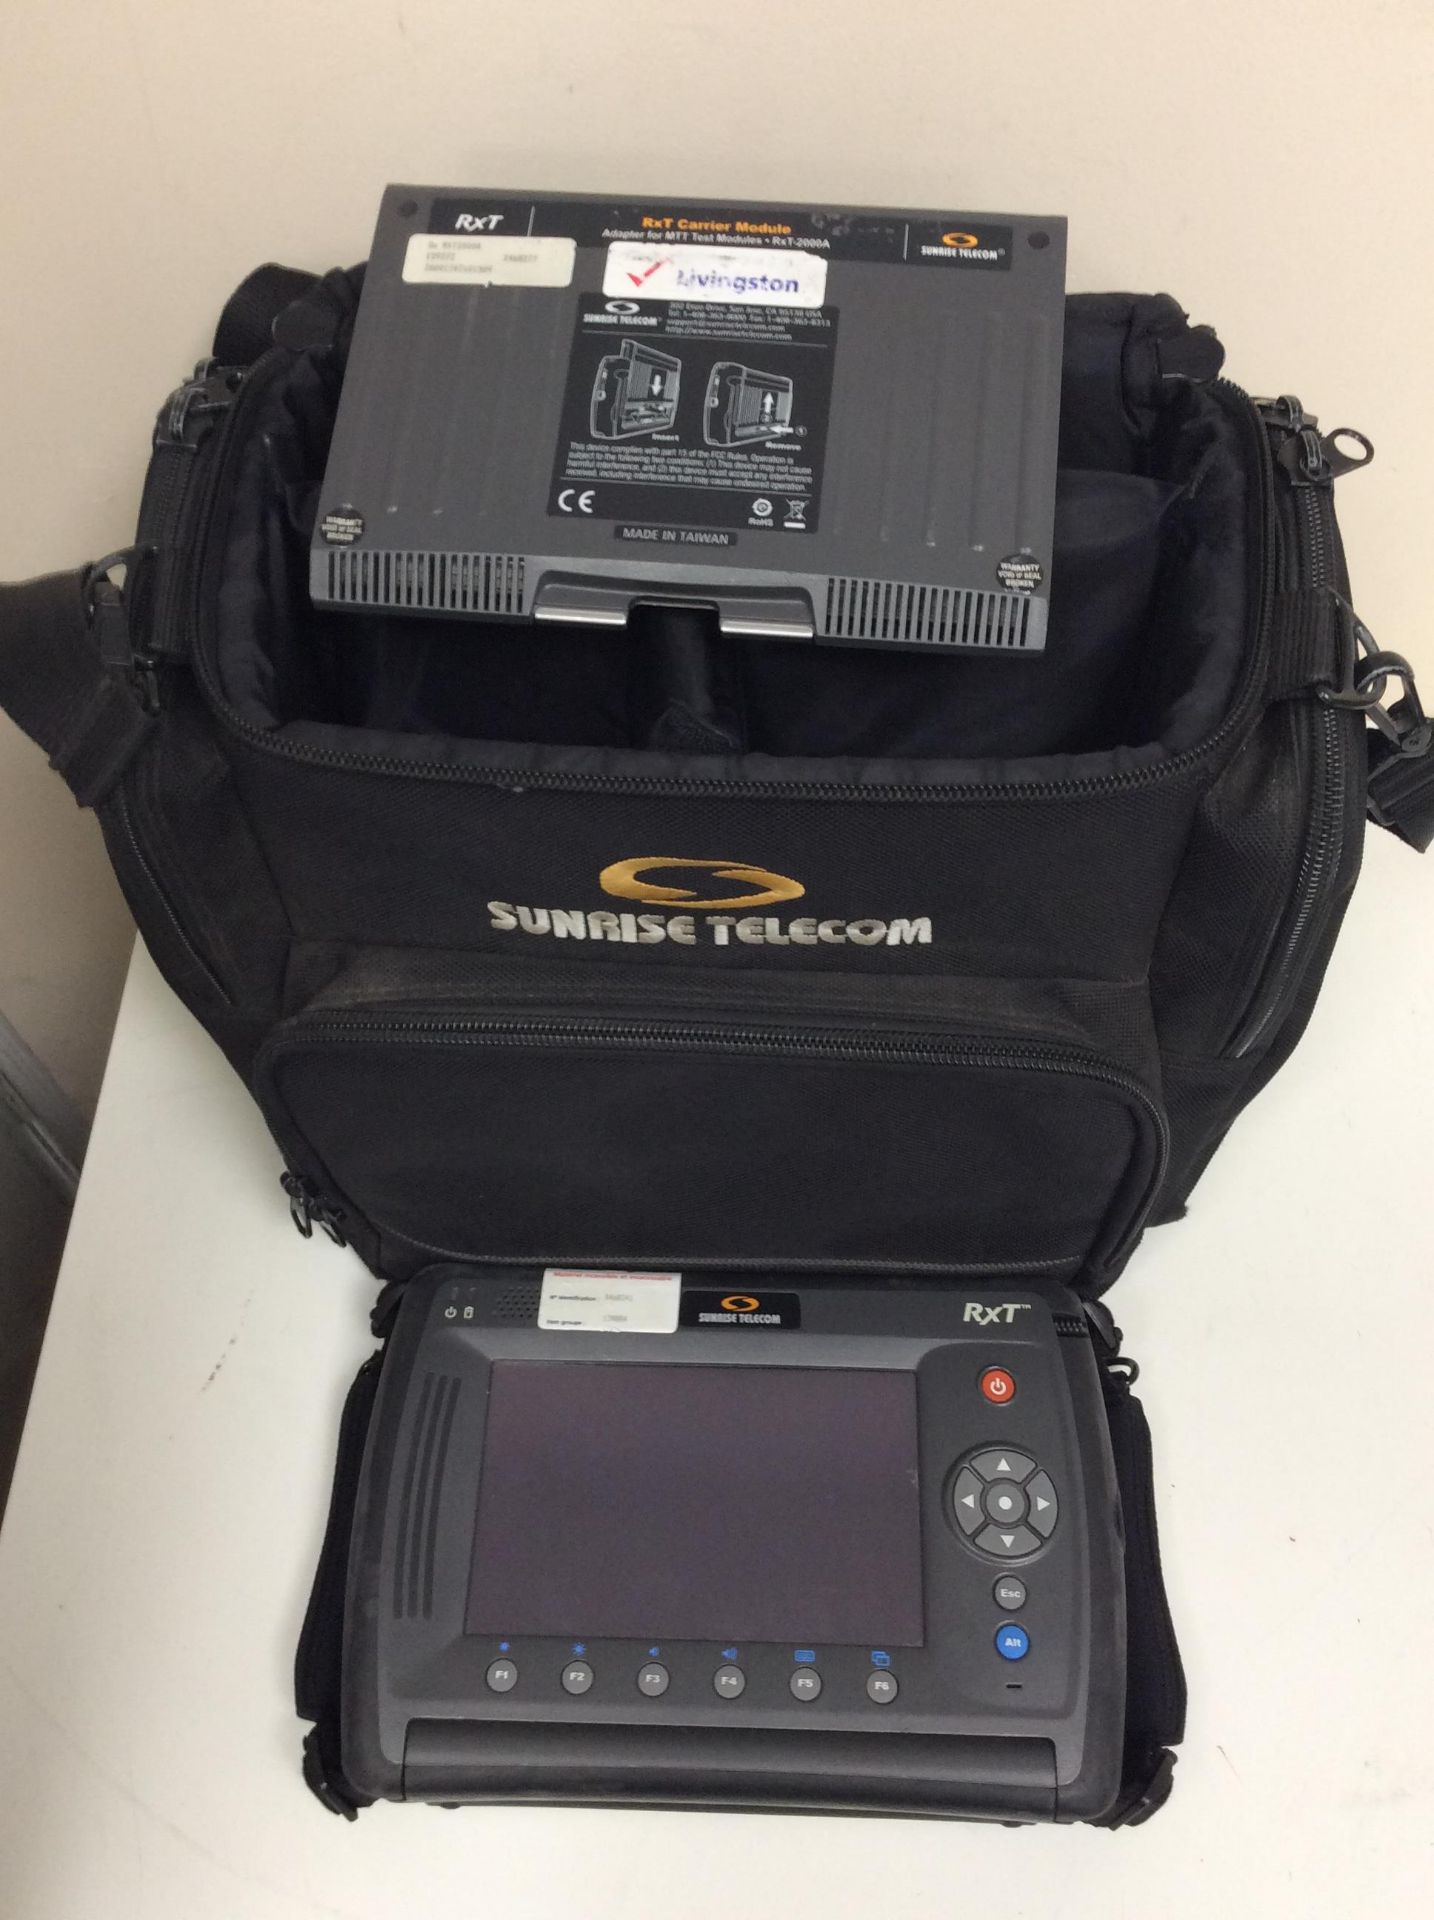 Sunrise telecom rxt2000a tdr dmm dsl test meter time domain reflectometer with 2 carrier modulues